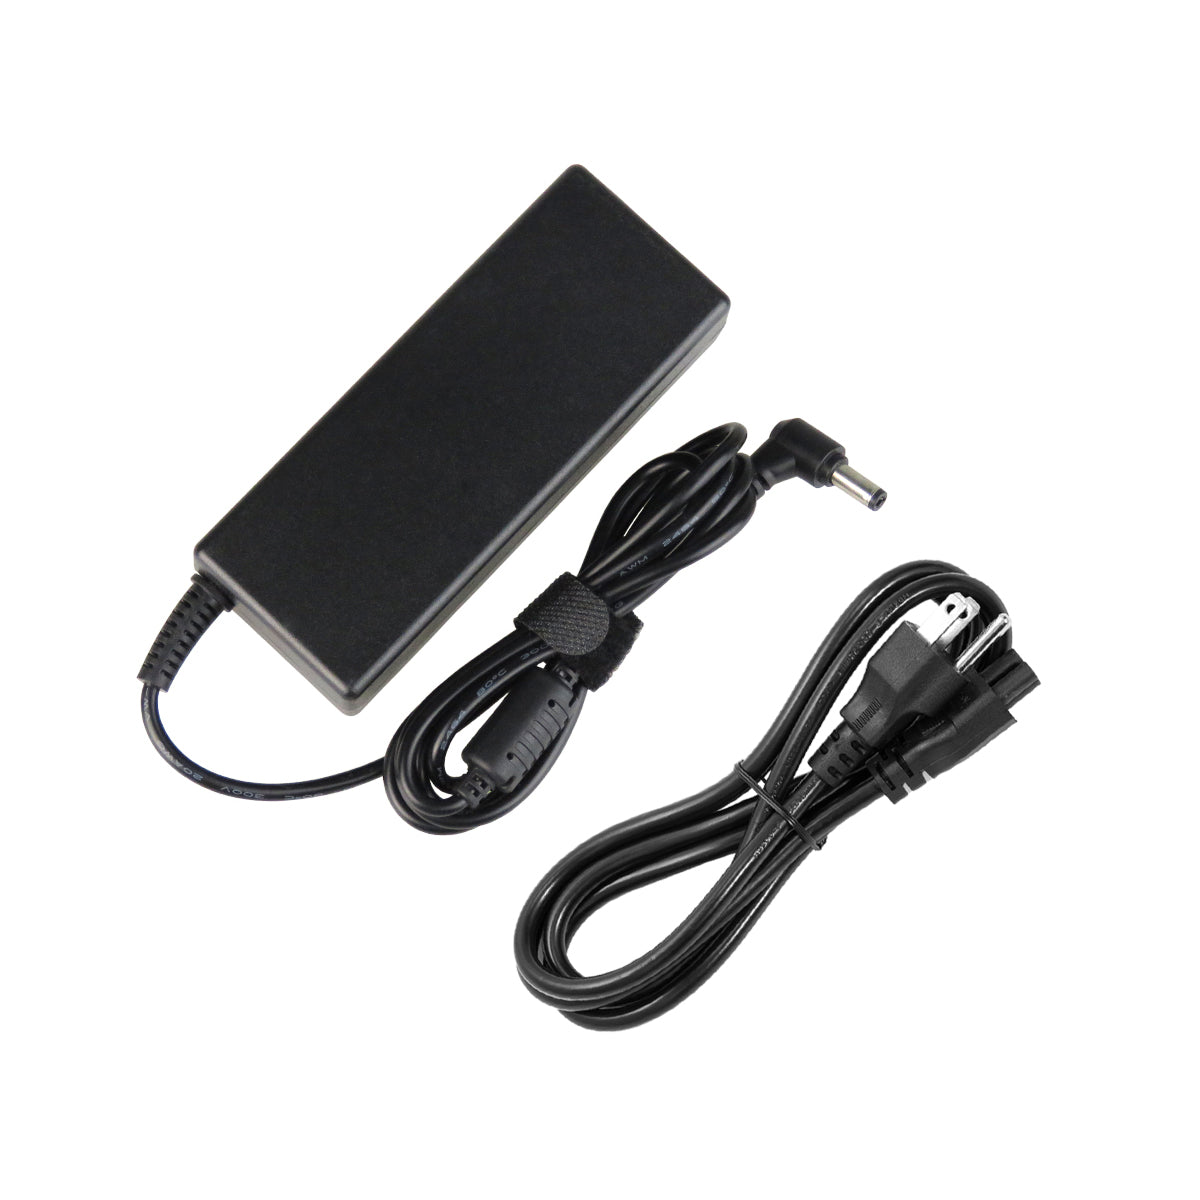 AC Adapter Charger for Gateway 6500 Series Notebook.